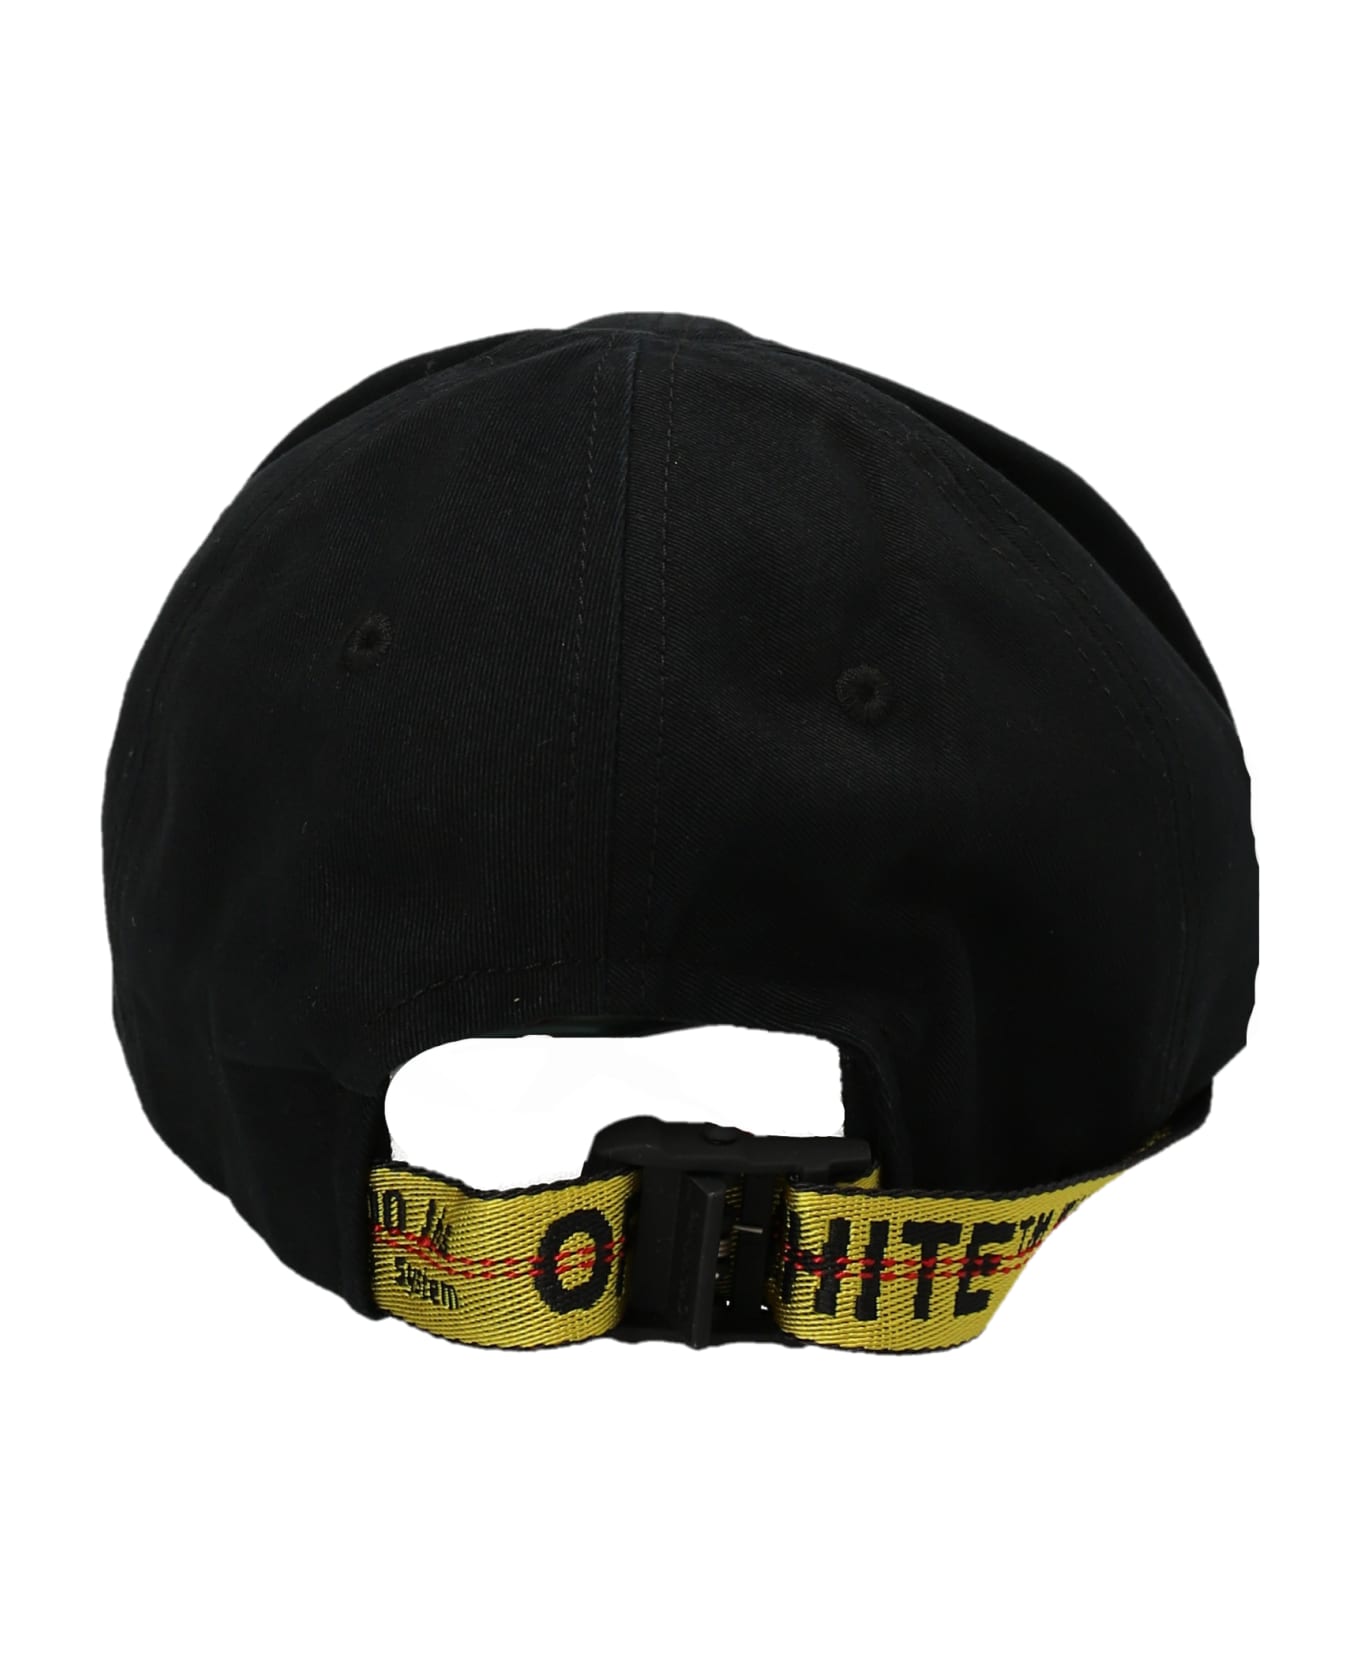 Off-White 'hellvetica Industrial' Cap - White/Black